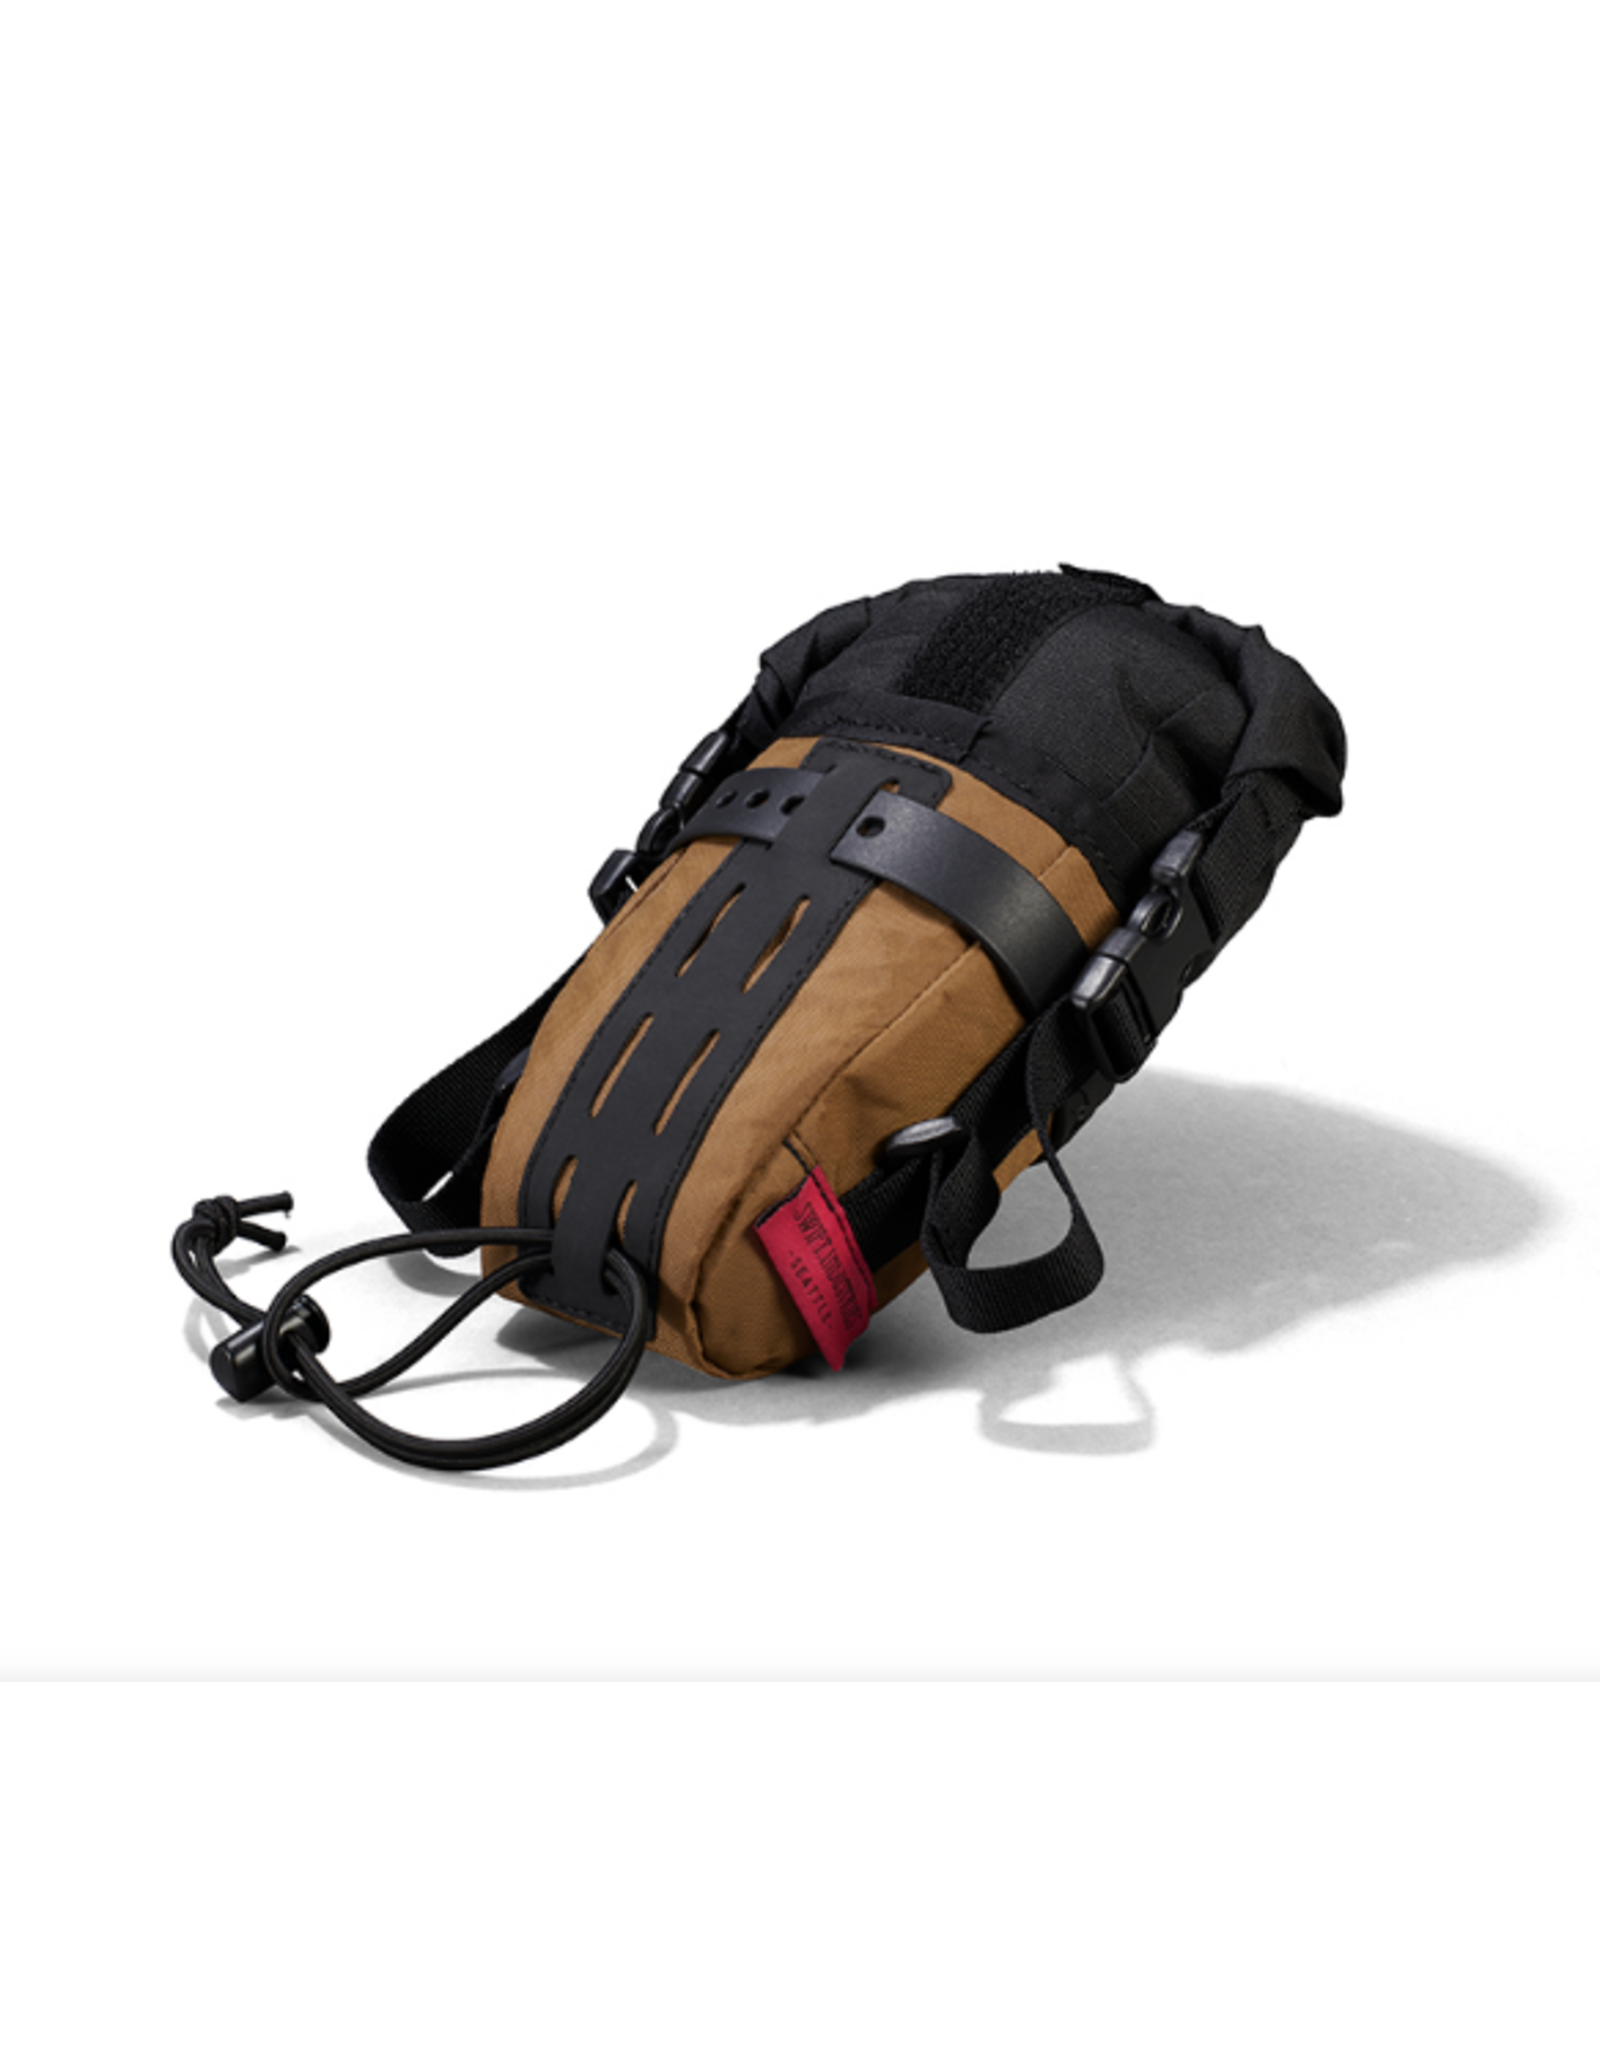 Swift Ind. Swift Industries Every Day Caddy Saddle Bag